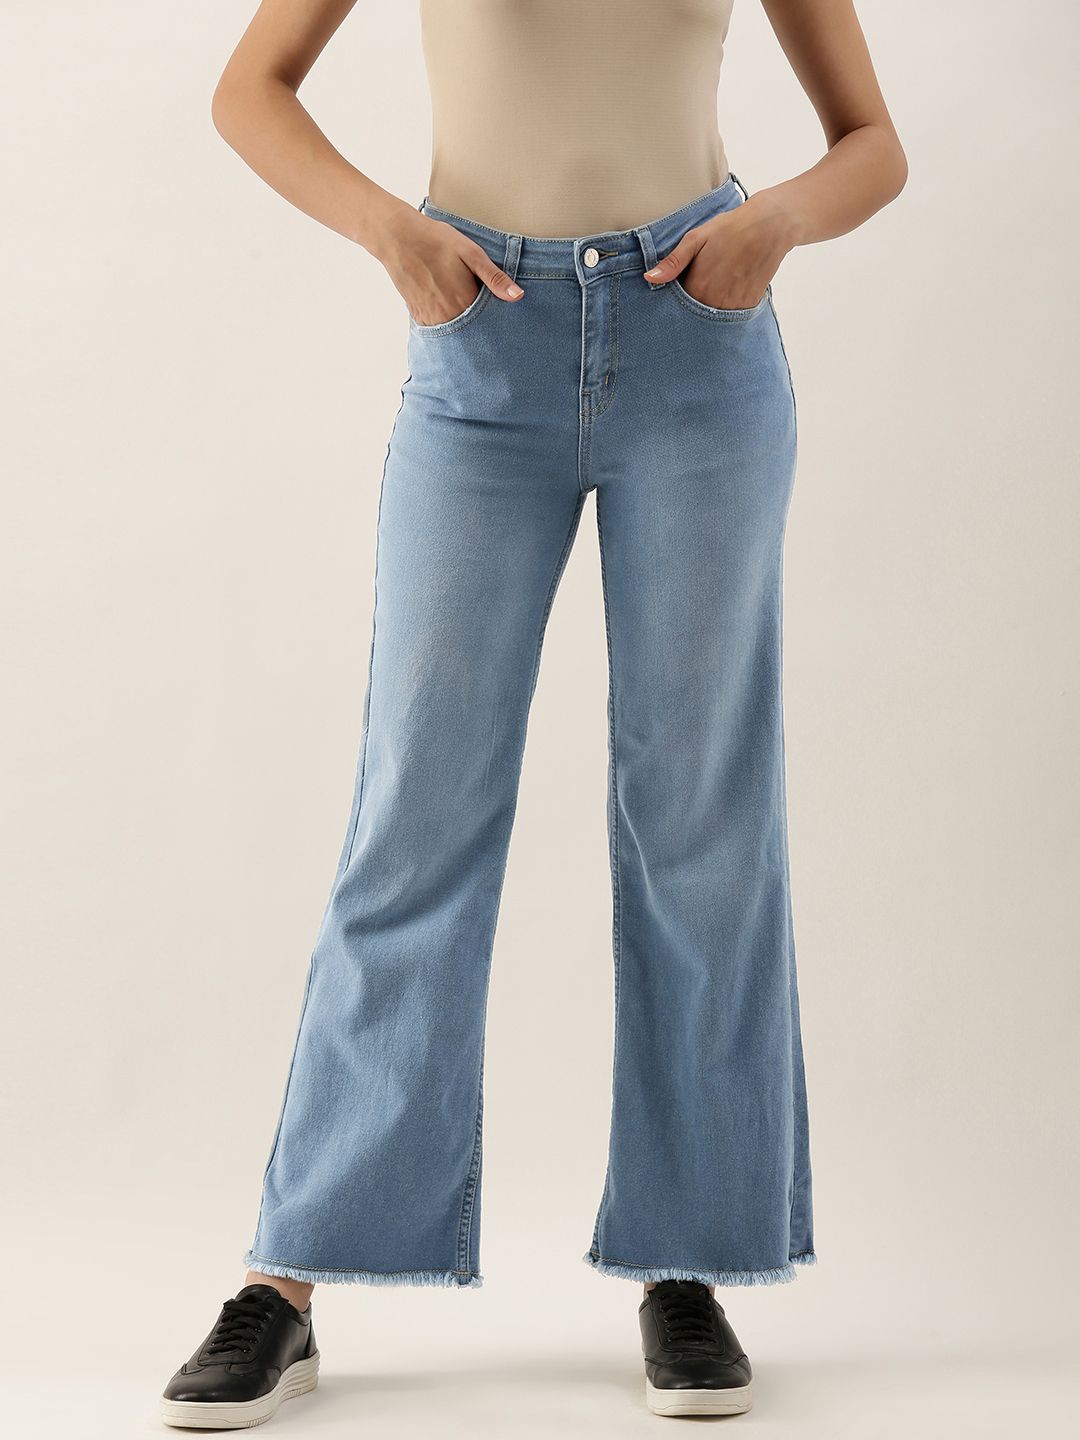 AND Women Blue Flared Light Fade Fit and Flared Stretchable Jeans Price in India